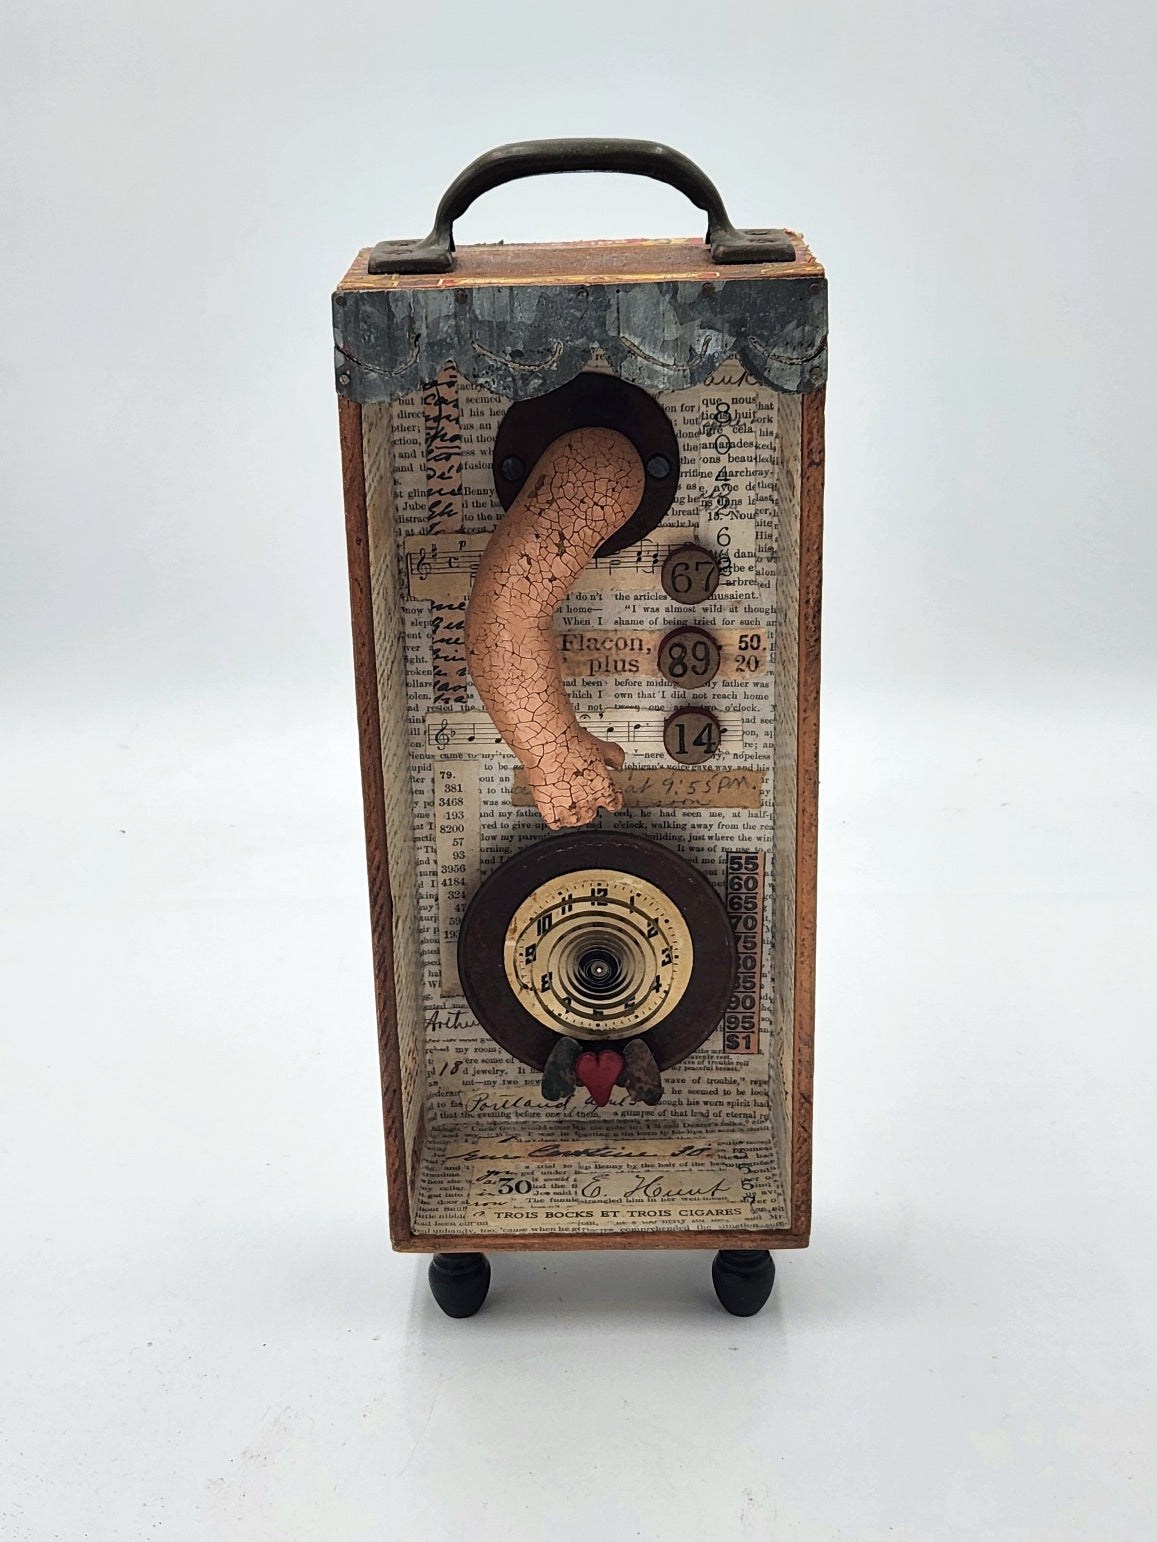 Assemblage Art - Armed Clock with Sacred Heart